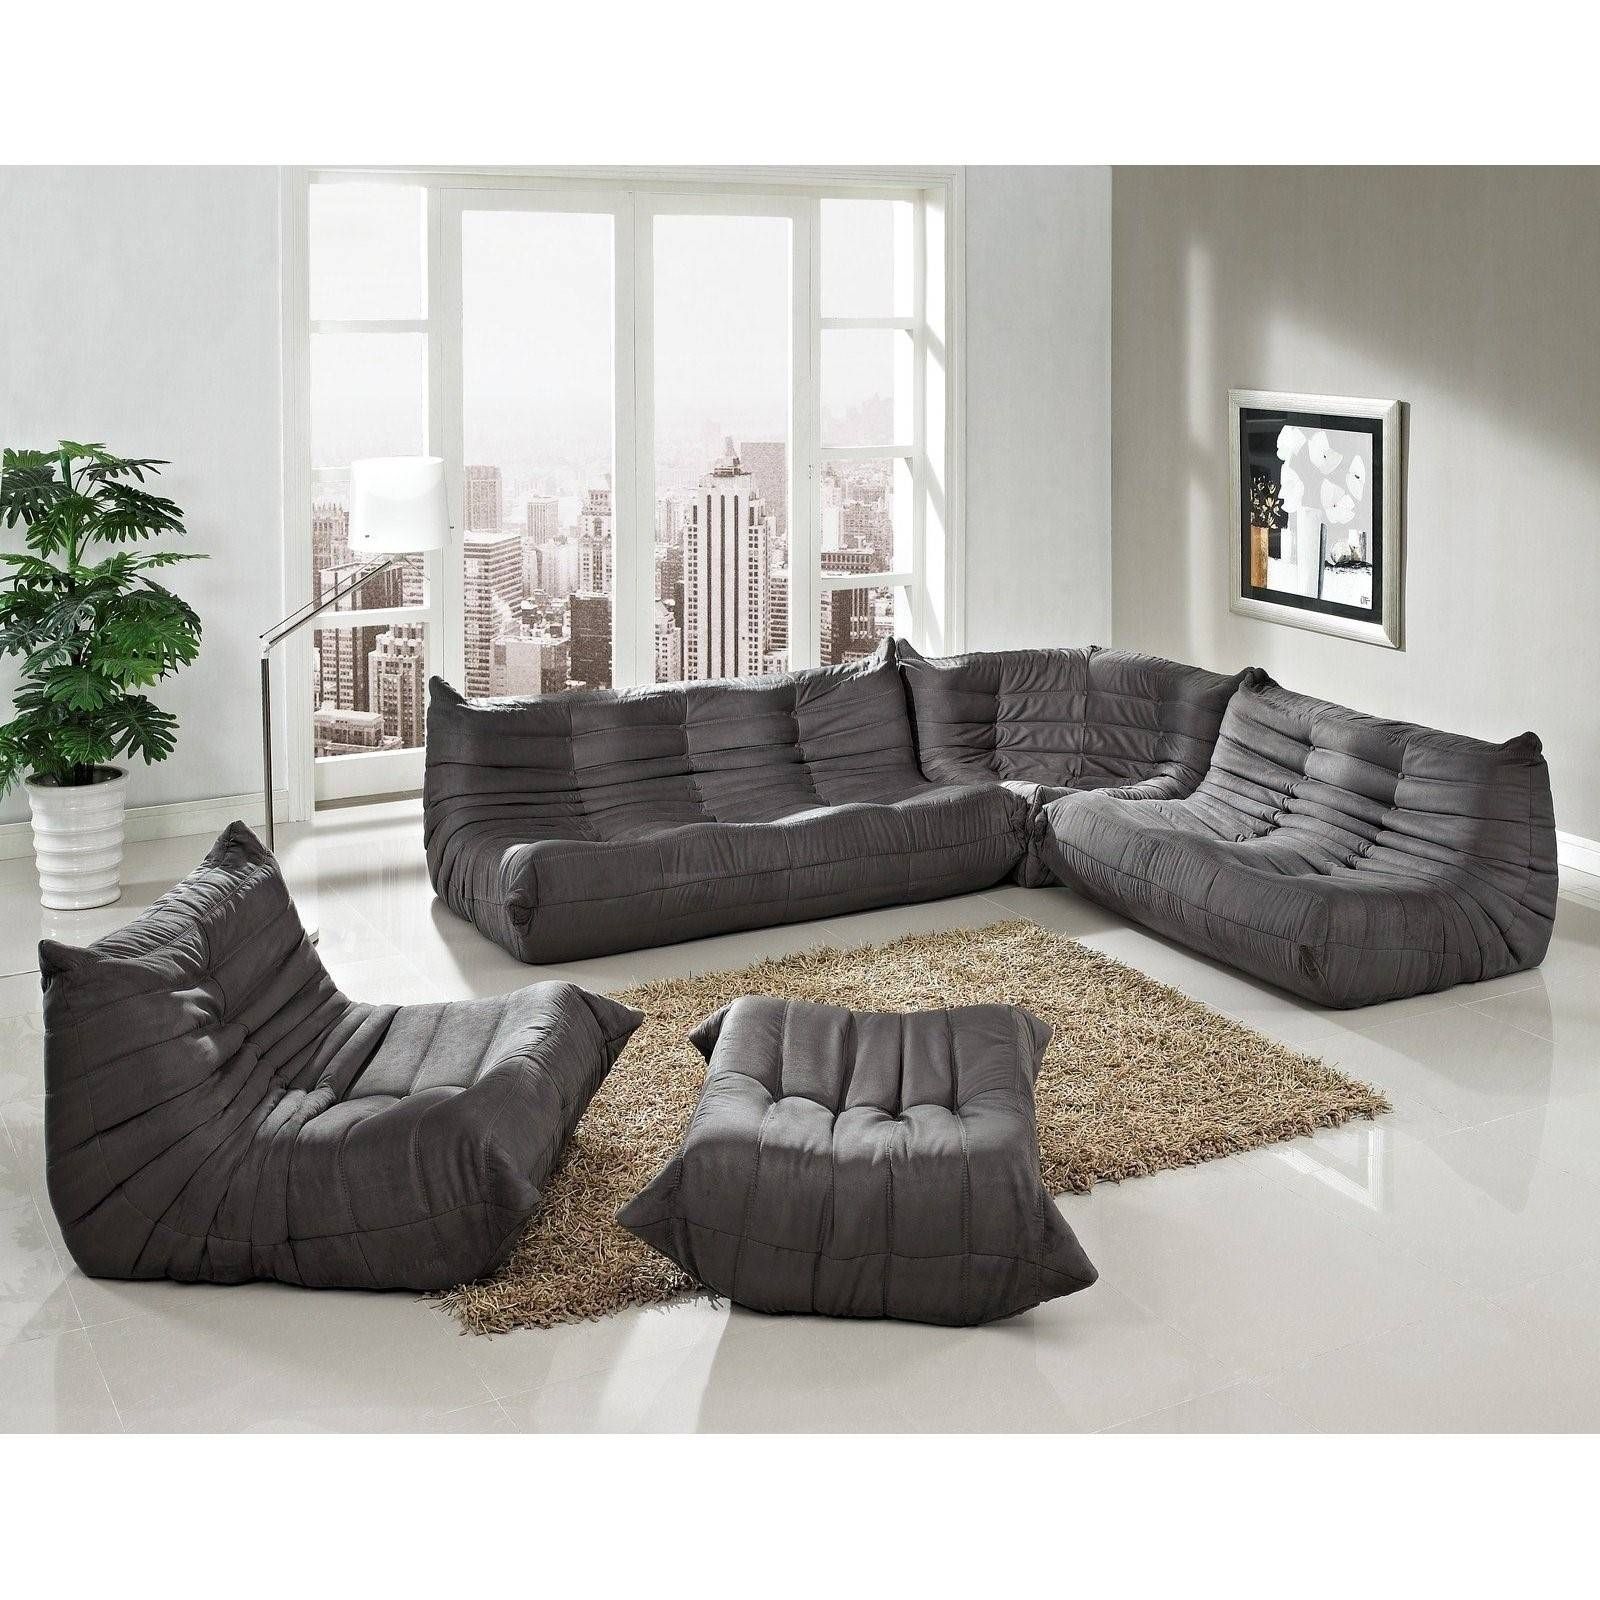 10 Foot Sectional Sofa – Tourdecarroll Intended For 10 Foot Sectional Sofa (Photo 115 of 299)